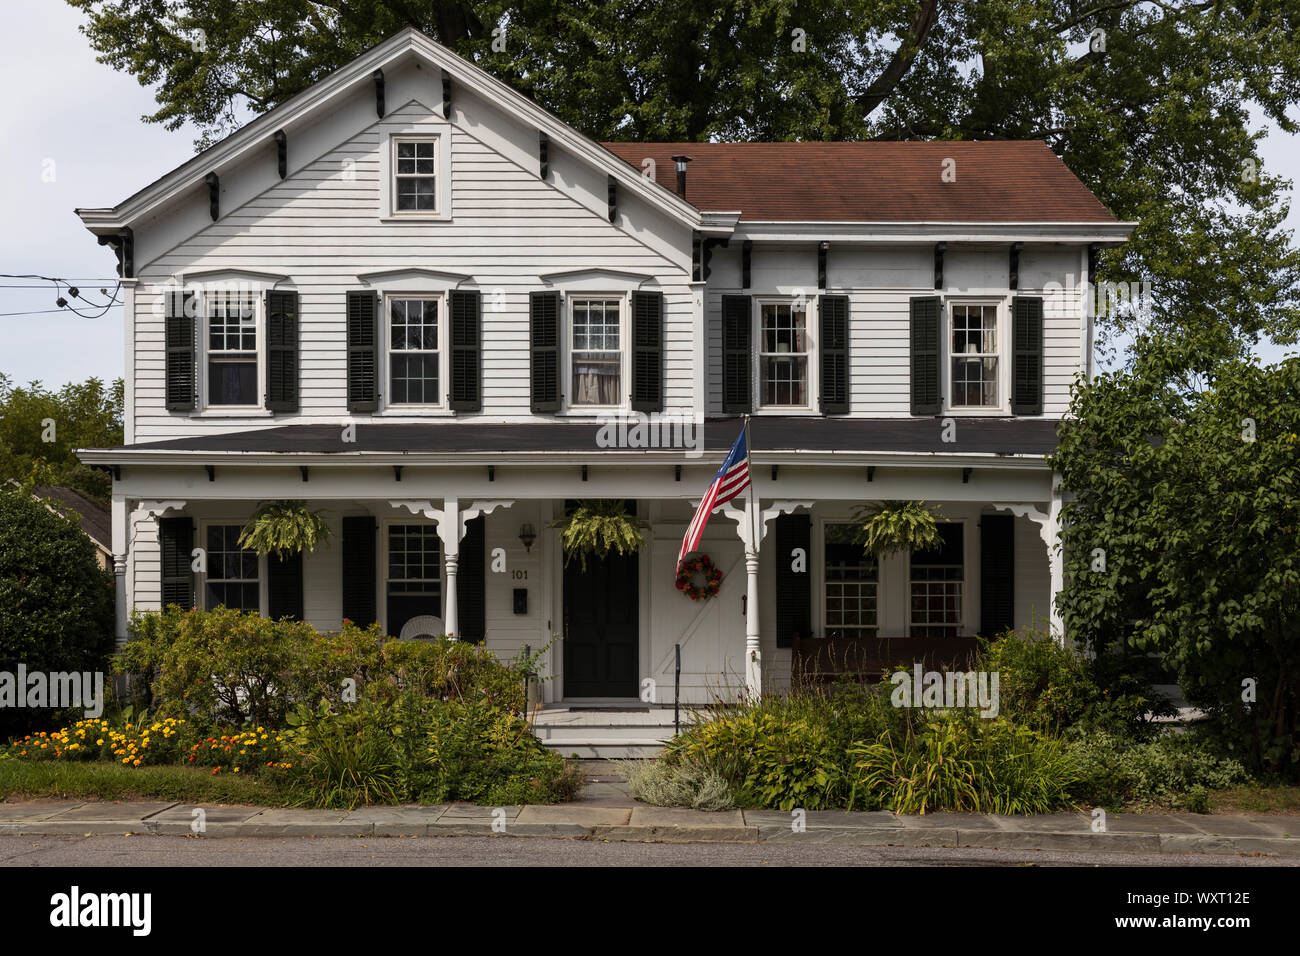 New Paltz, New York - September 6, 2019: American flag flies in front of large traditional home in quiet neighborhood Stock Photo